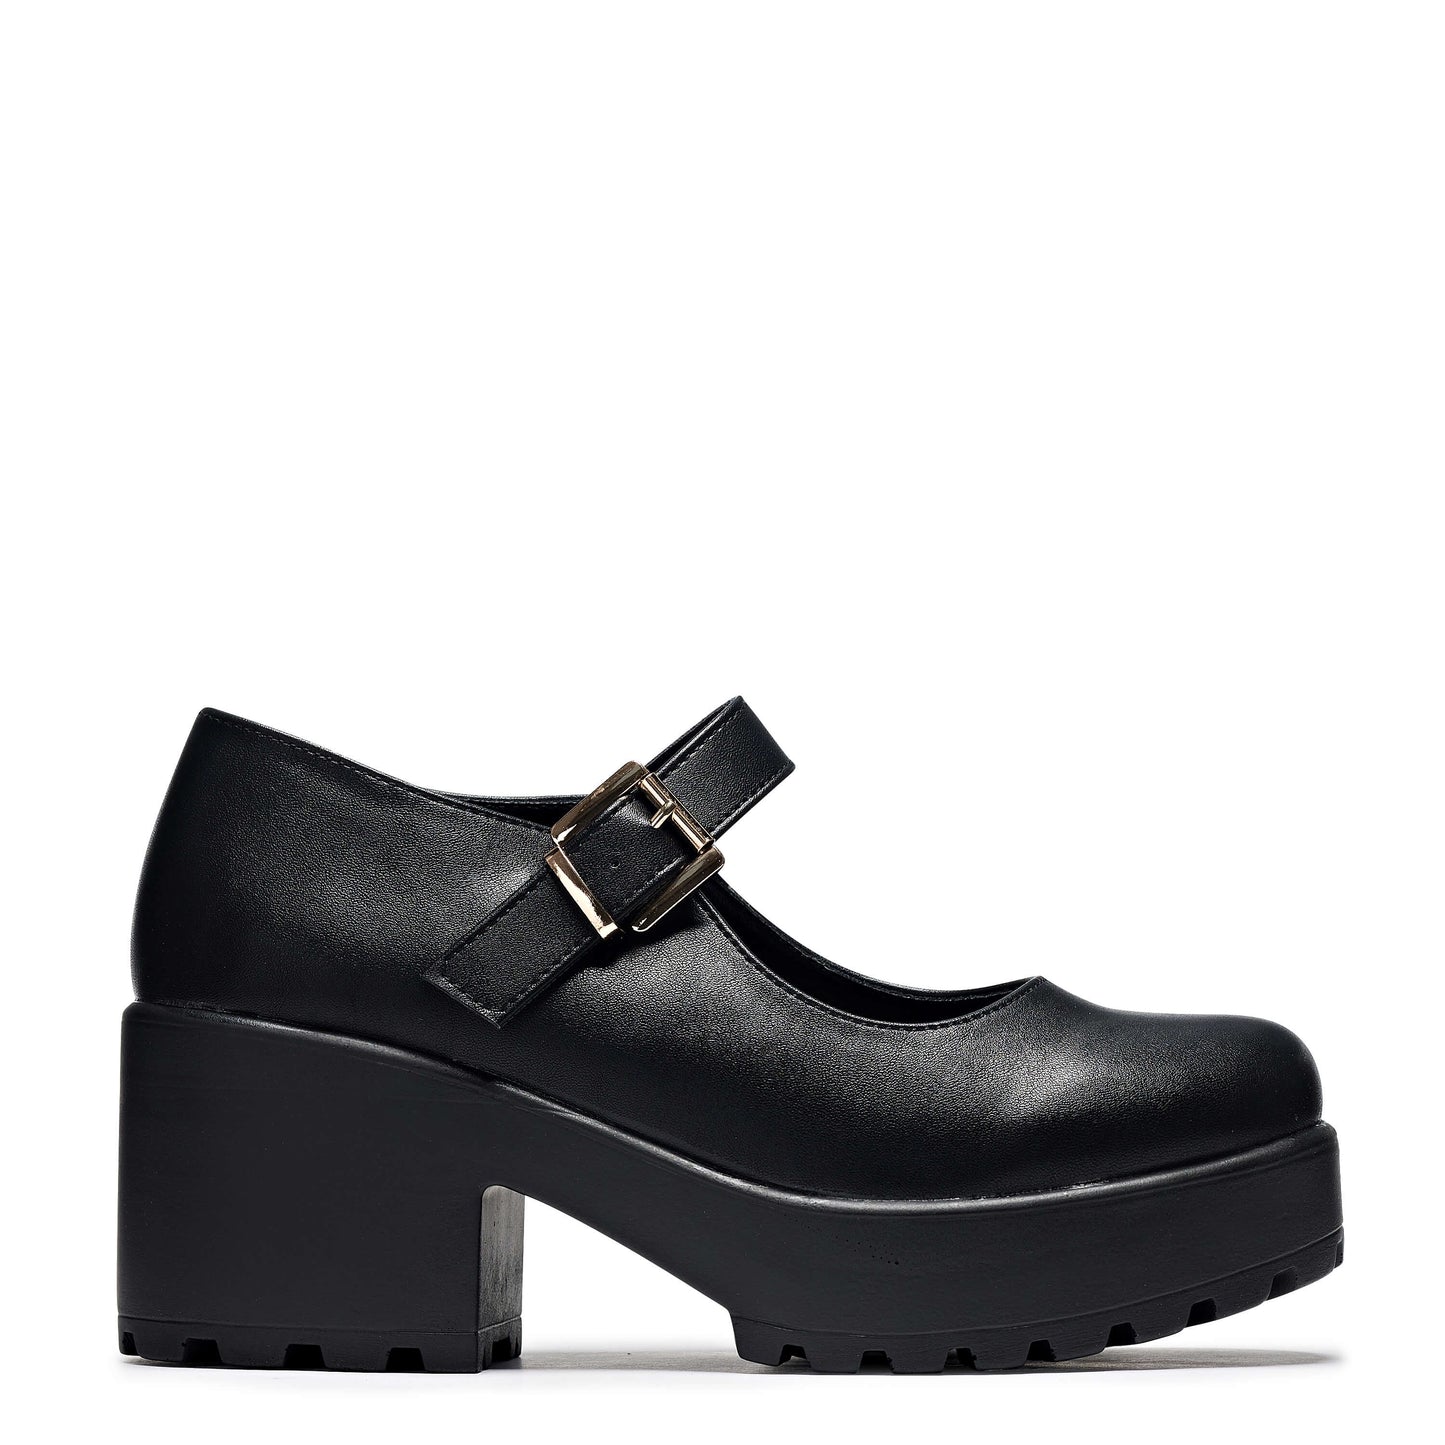 Tira WIDE FIT Mary Jane Shoes 'Faux Leather Edition' - Mary Janes - KOI Footwear - Black - Side View